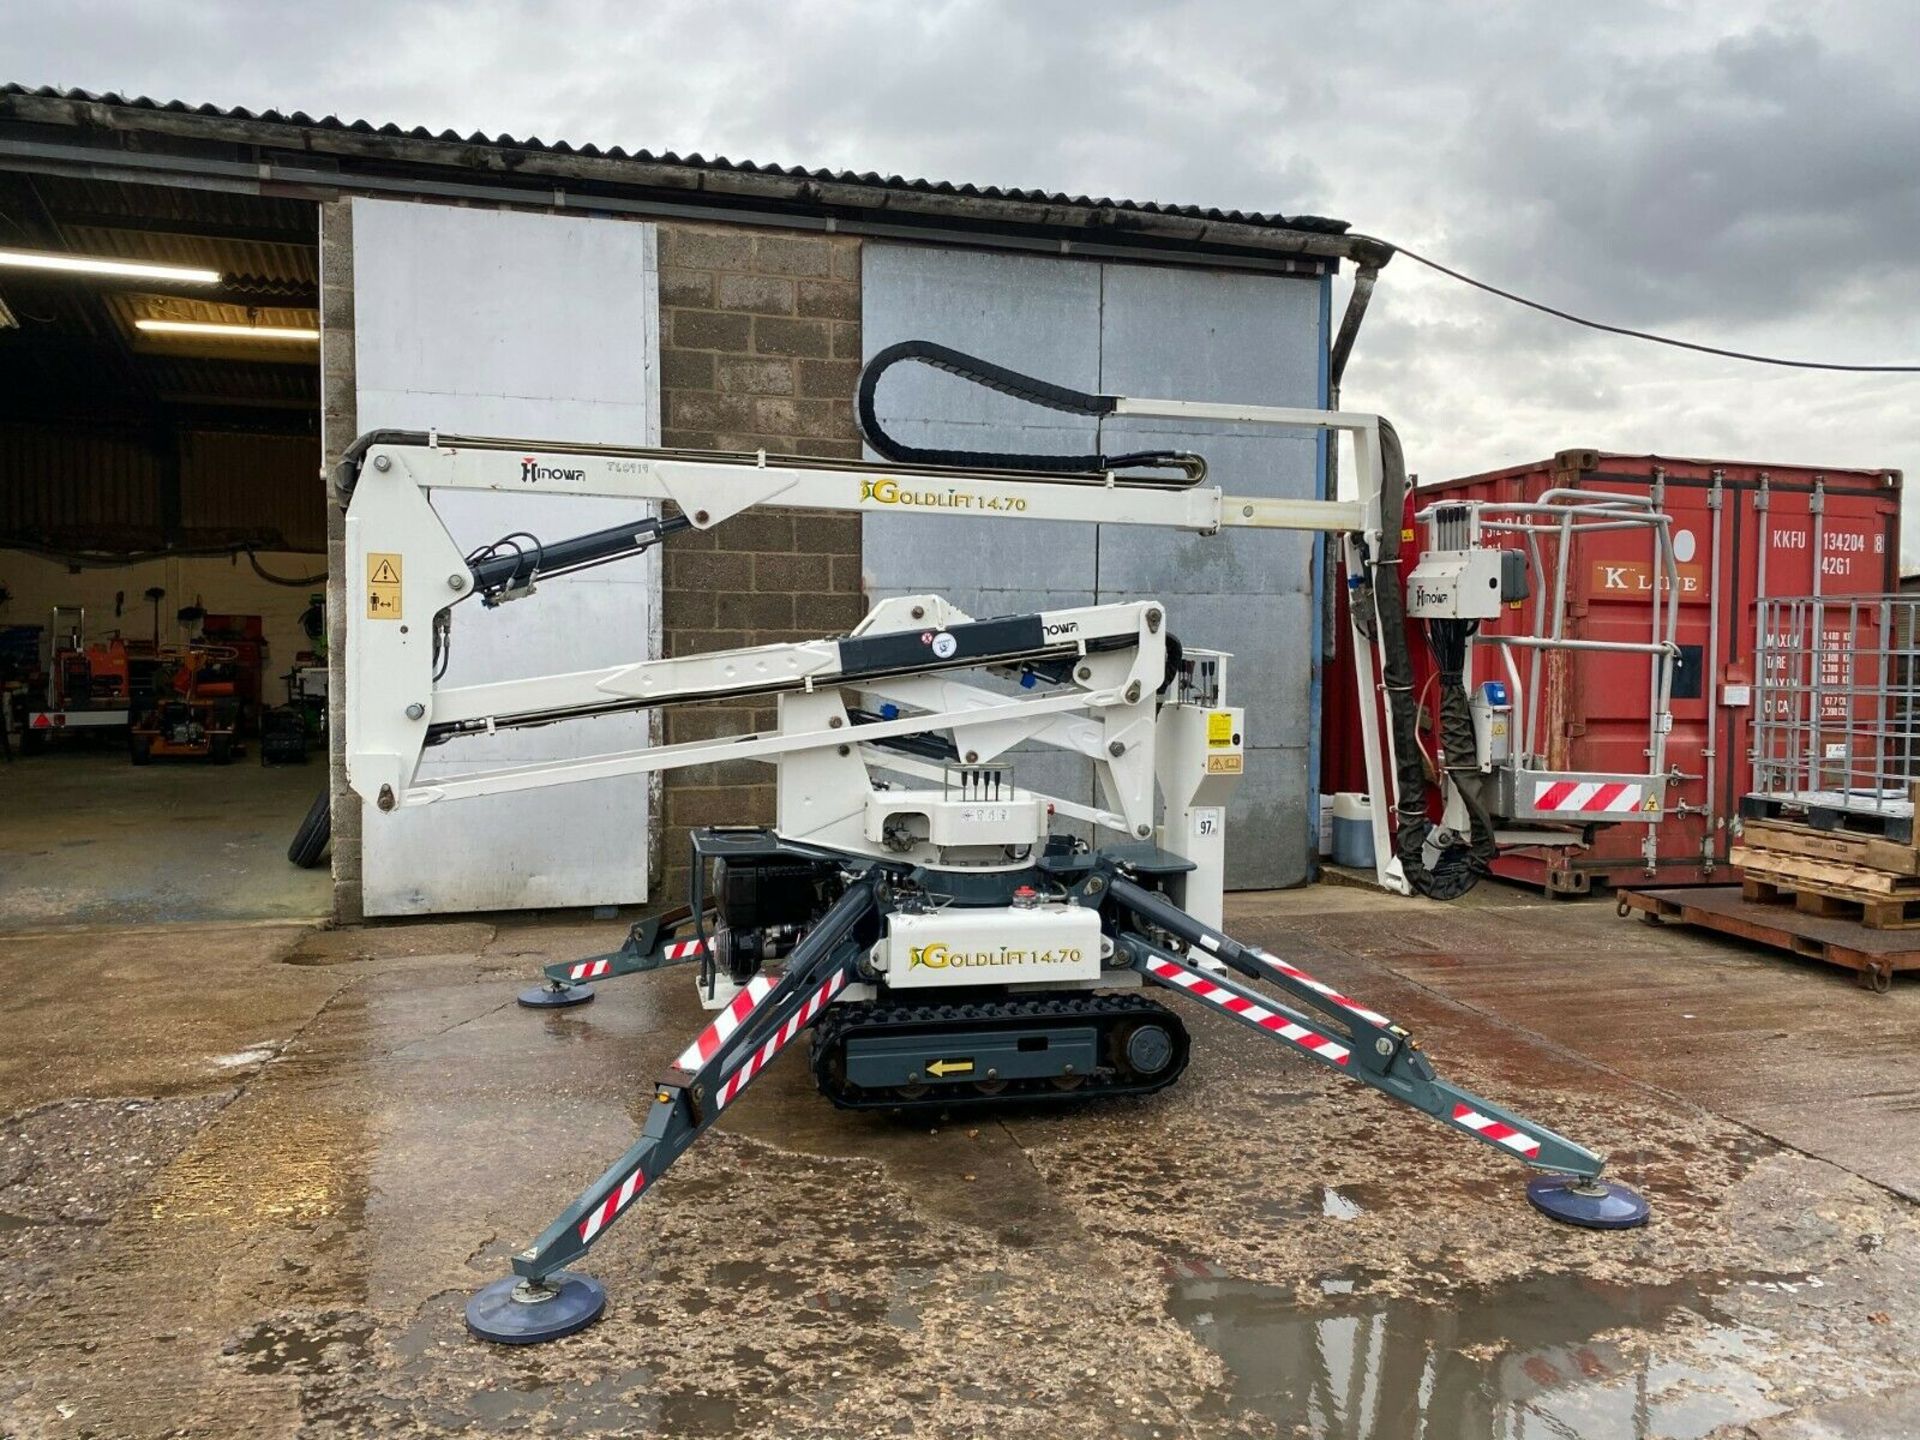 HINOWA GOLDLIFT 14.7 METRE, DIESEL, 230 VOLT ELECTRIC MOTOR, EXPANDING TRACKS, 1 OWNER FROM NEW - Image 2 of 3